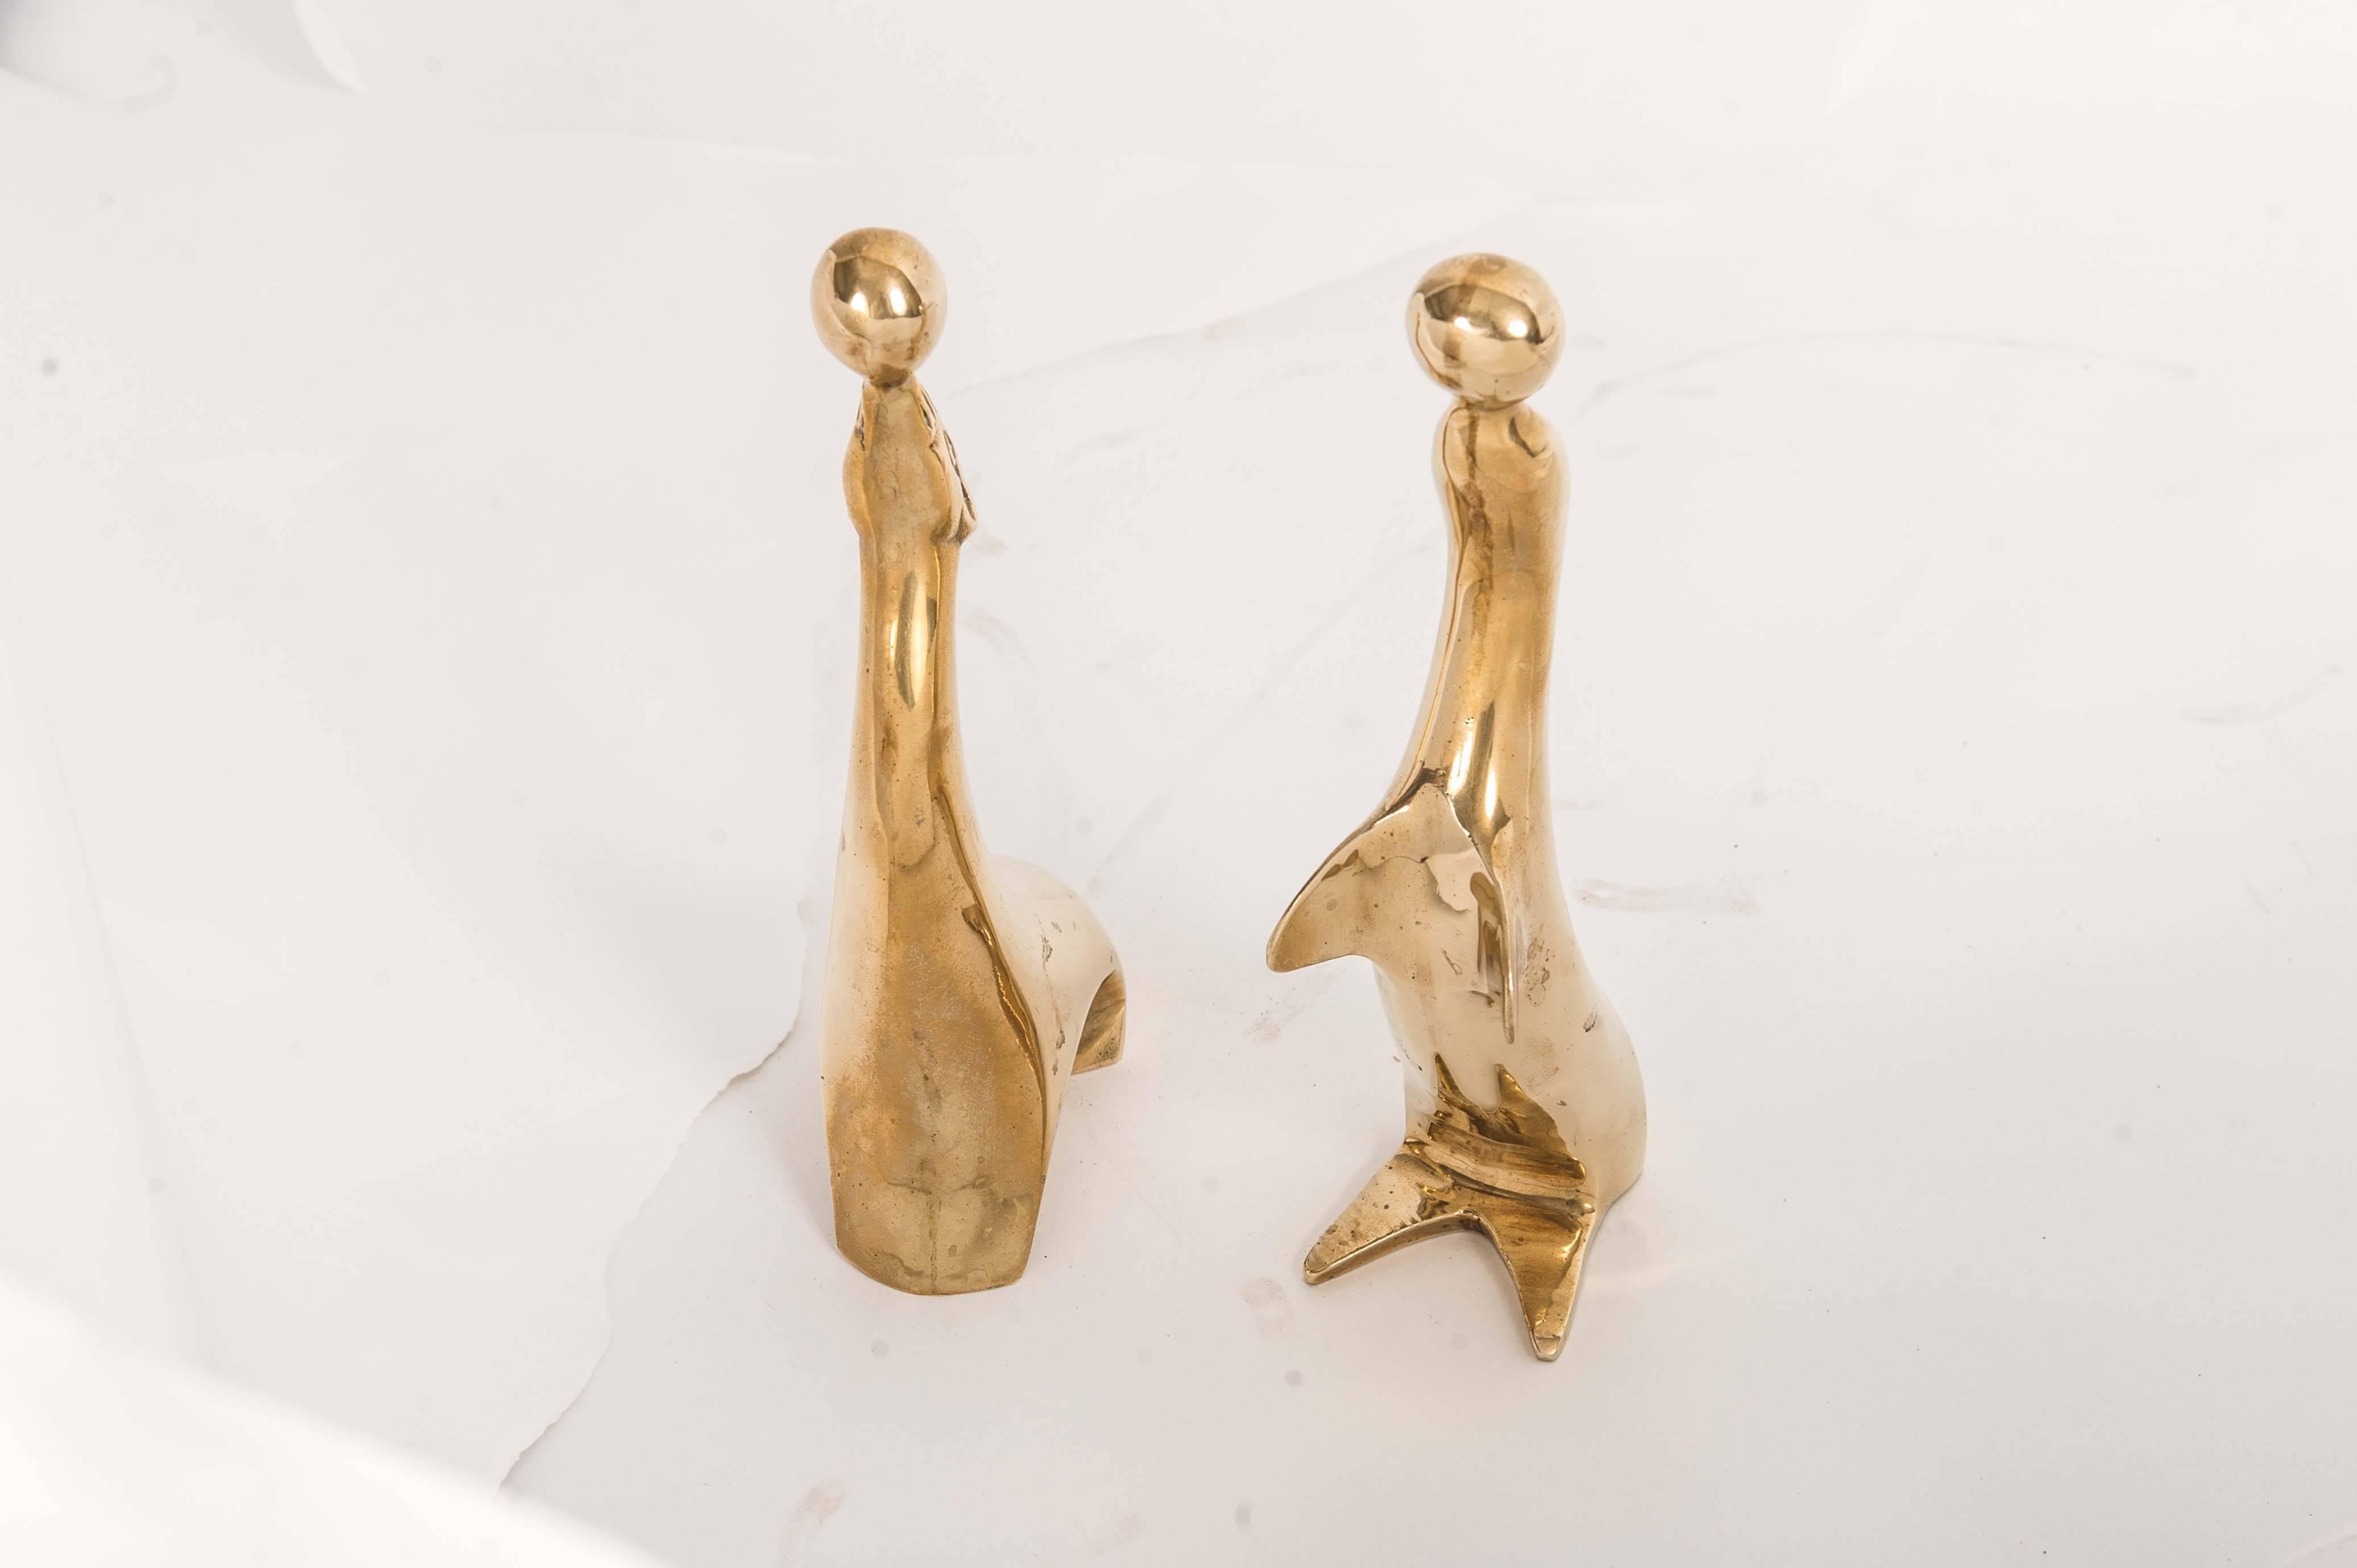 Very decorative set of two seals made of brass.
These midcentury friends are both playing with their own ball in a nice stylized shape.